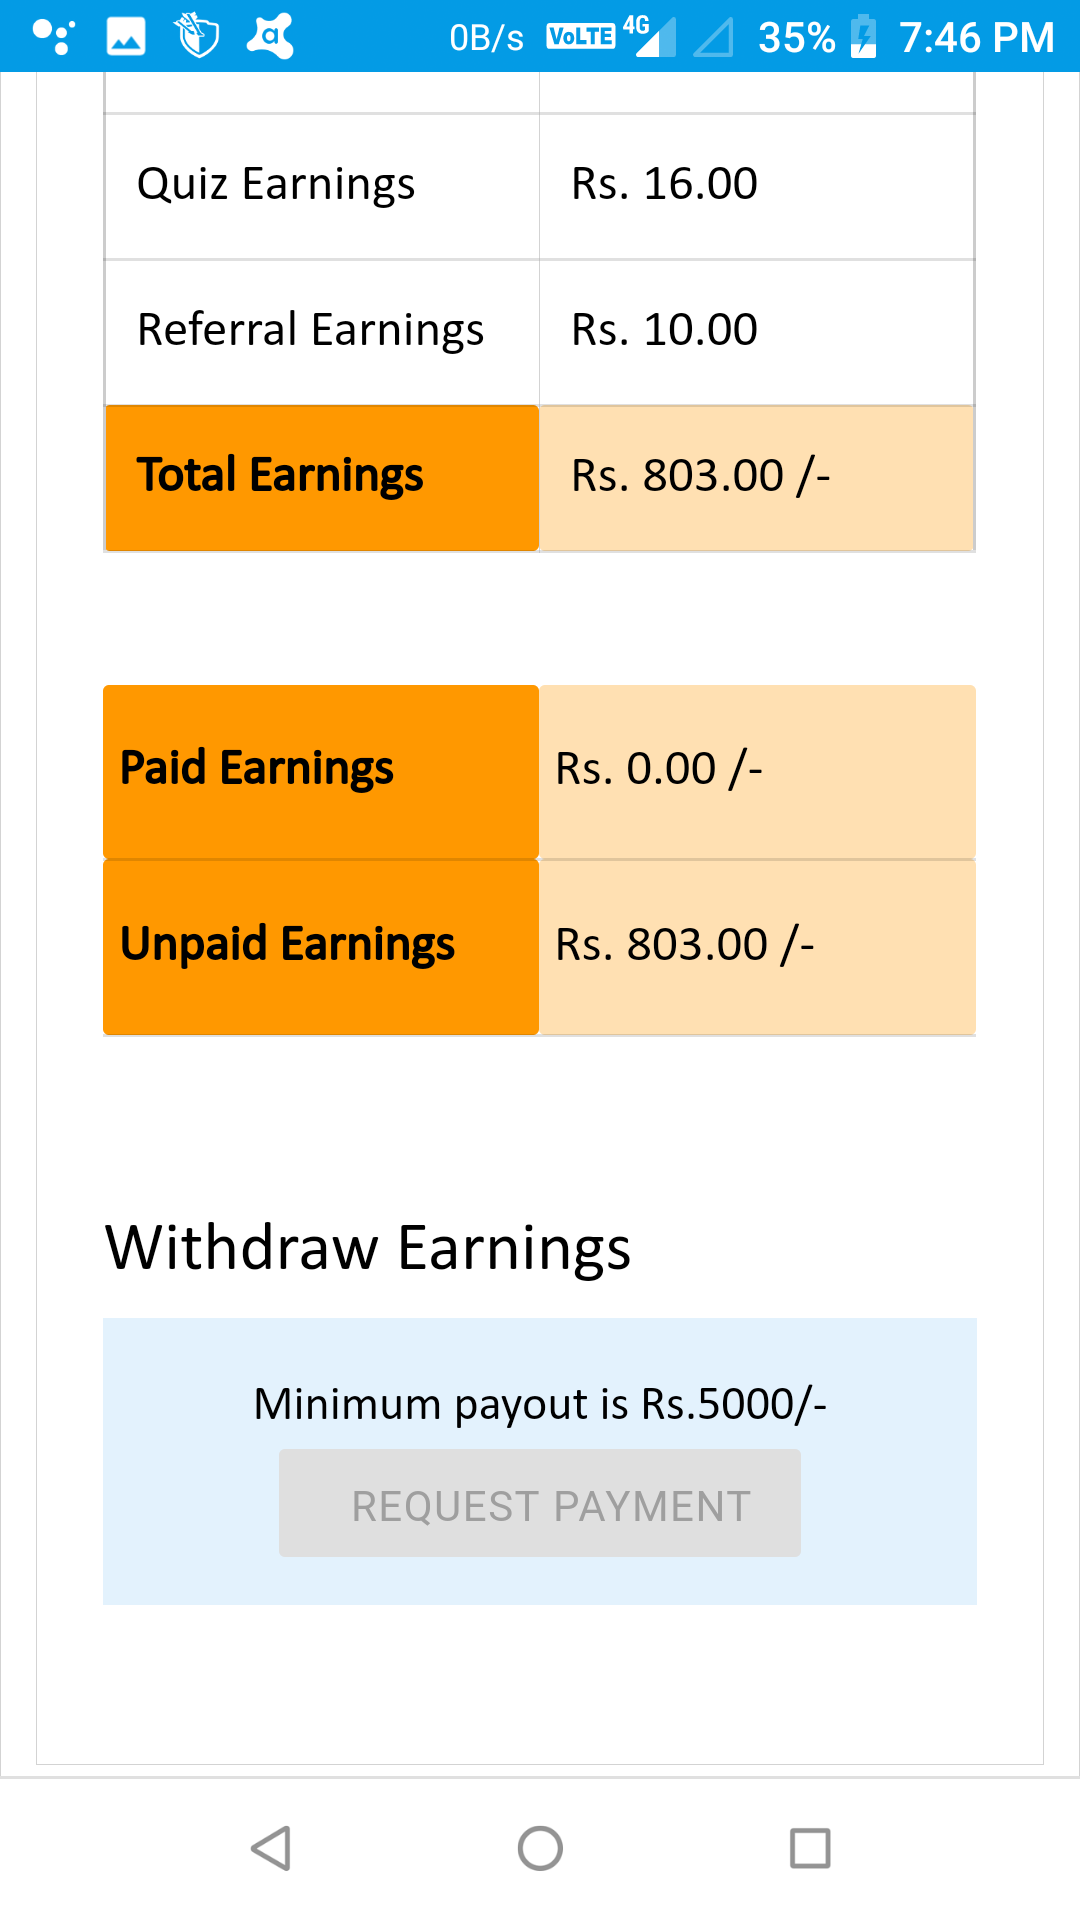 We are Hiring - Earn Rs.15000/- Per month - Simple Copy Paste JobsJobsAll Indiaother